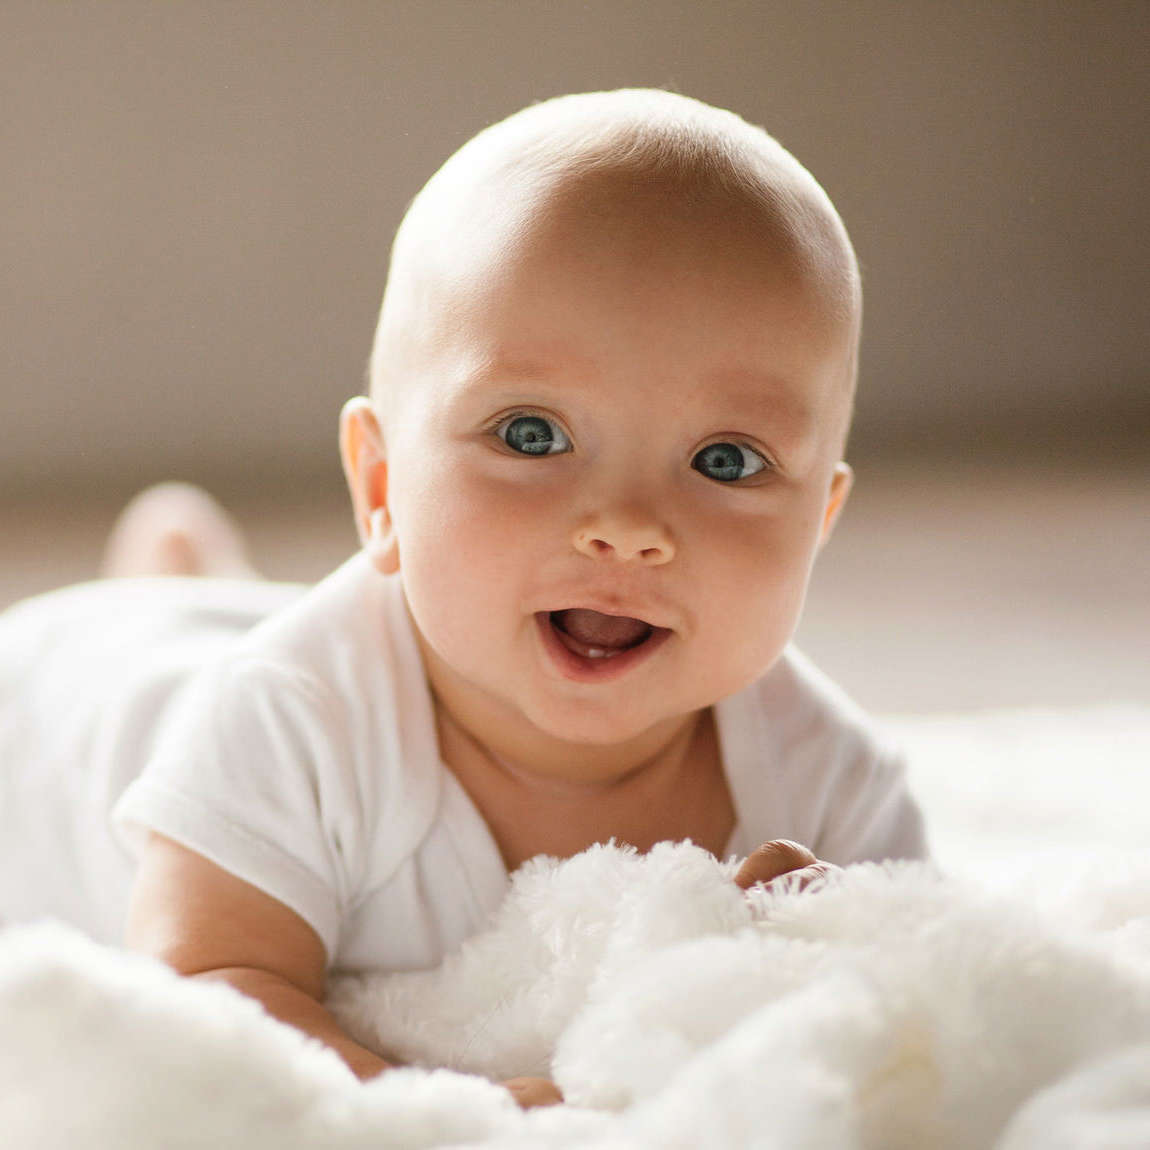 Portrait of small baby. Kid is lying, smiling and showing two teeth.